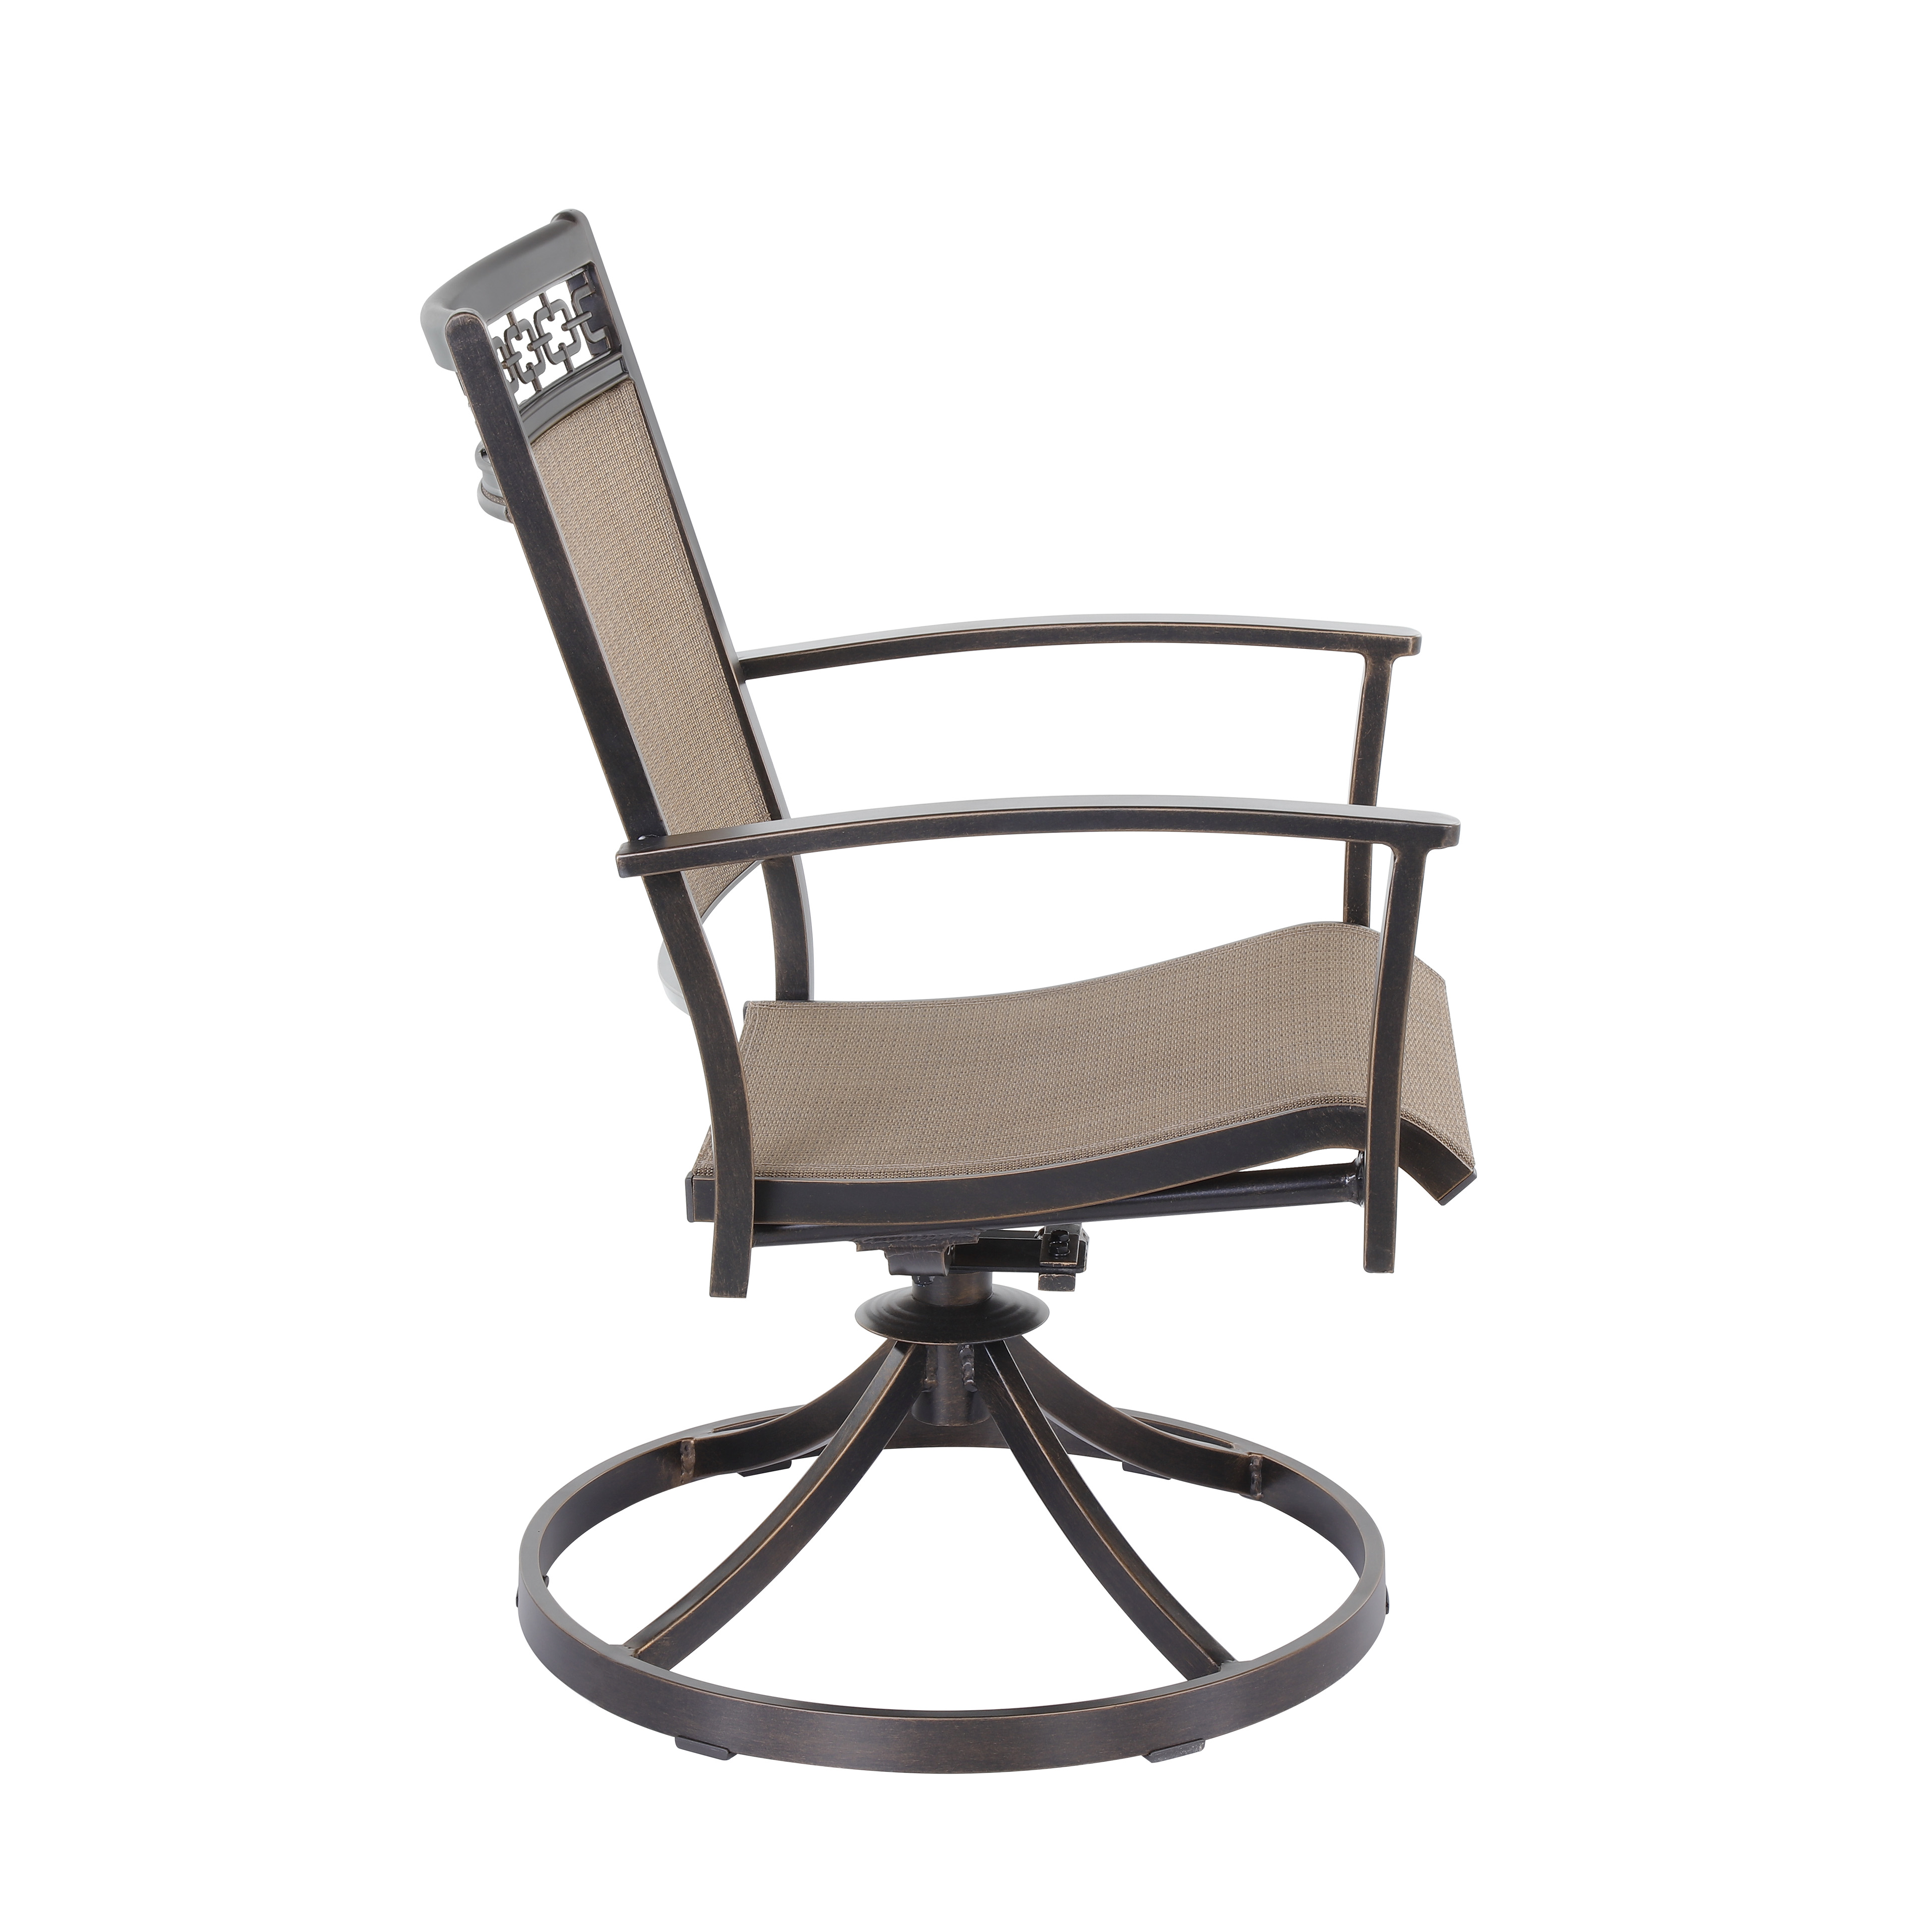 All Weather Patio Dining Chair, Sling Fabric Swivel Rocker With Rustproof Finish Aluminum Frame, Outdoor Garden Furniture 2 Pieces Sets - image 4 of 11